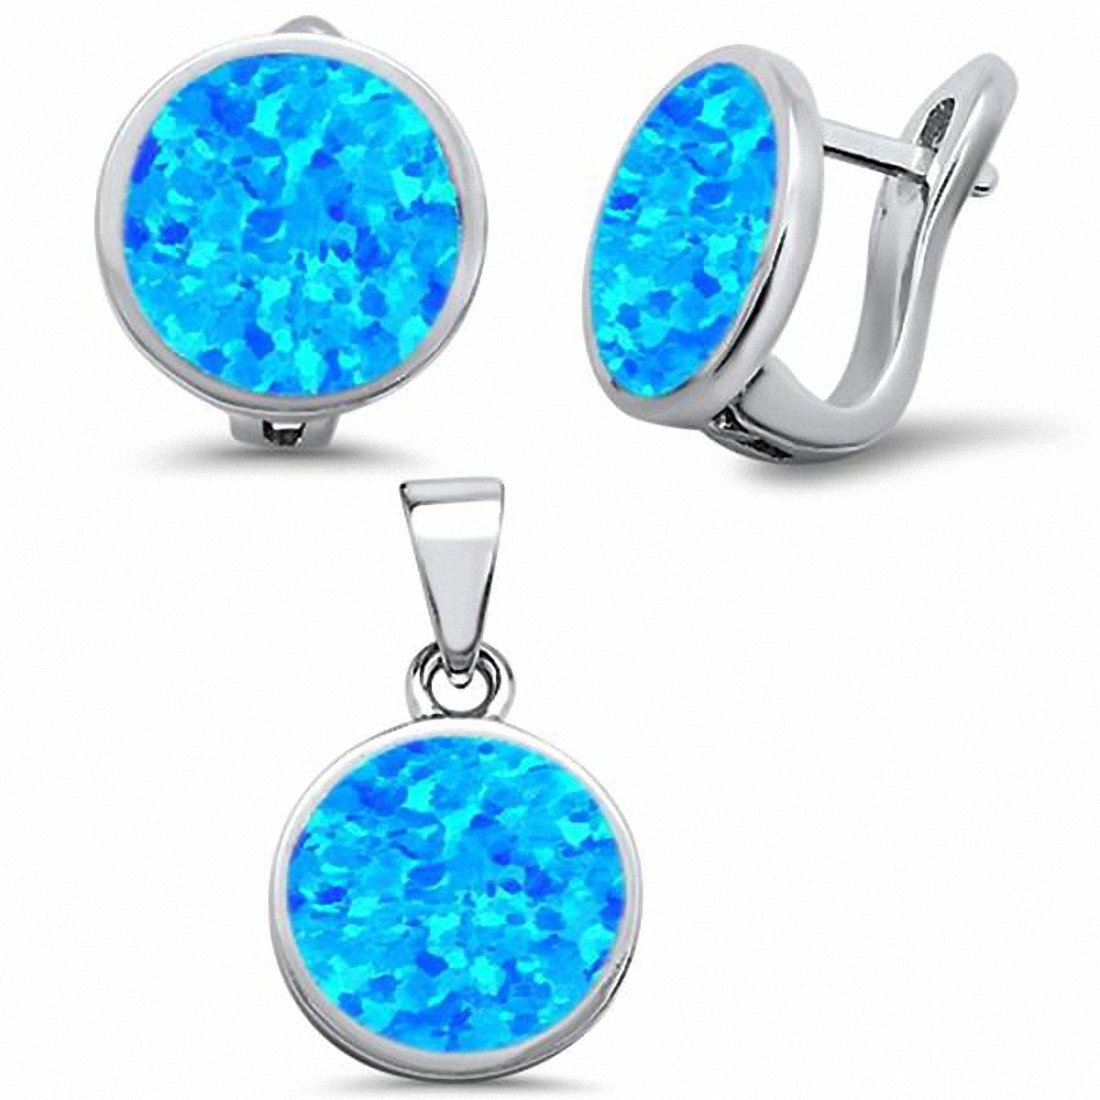 Jewelry Set Button Half Ball Moon Earring Pendant Lab Created Opal 925 Sterling Silver